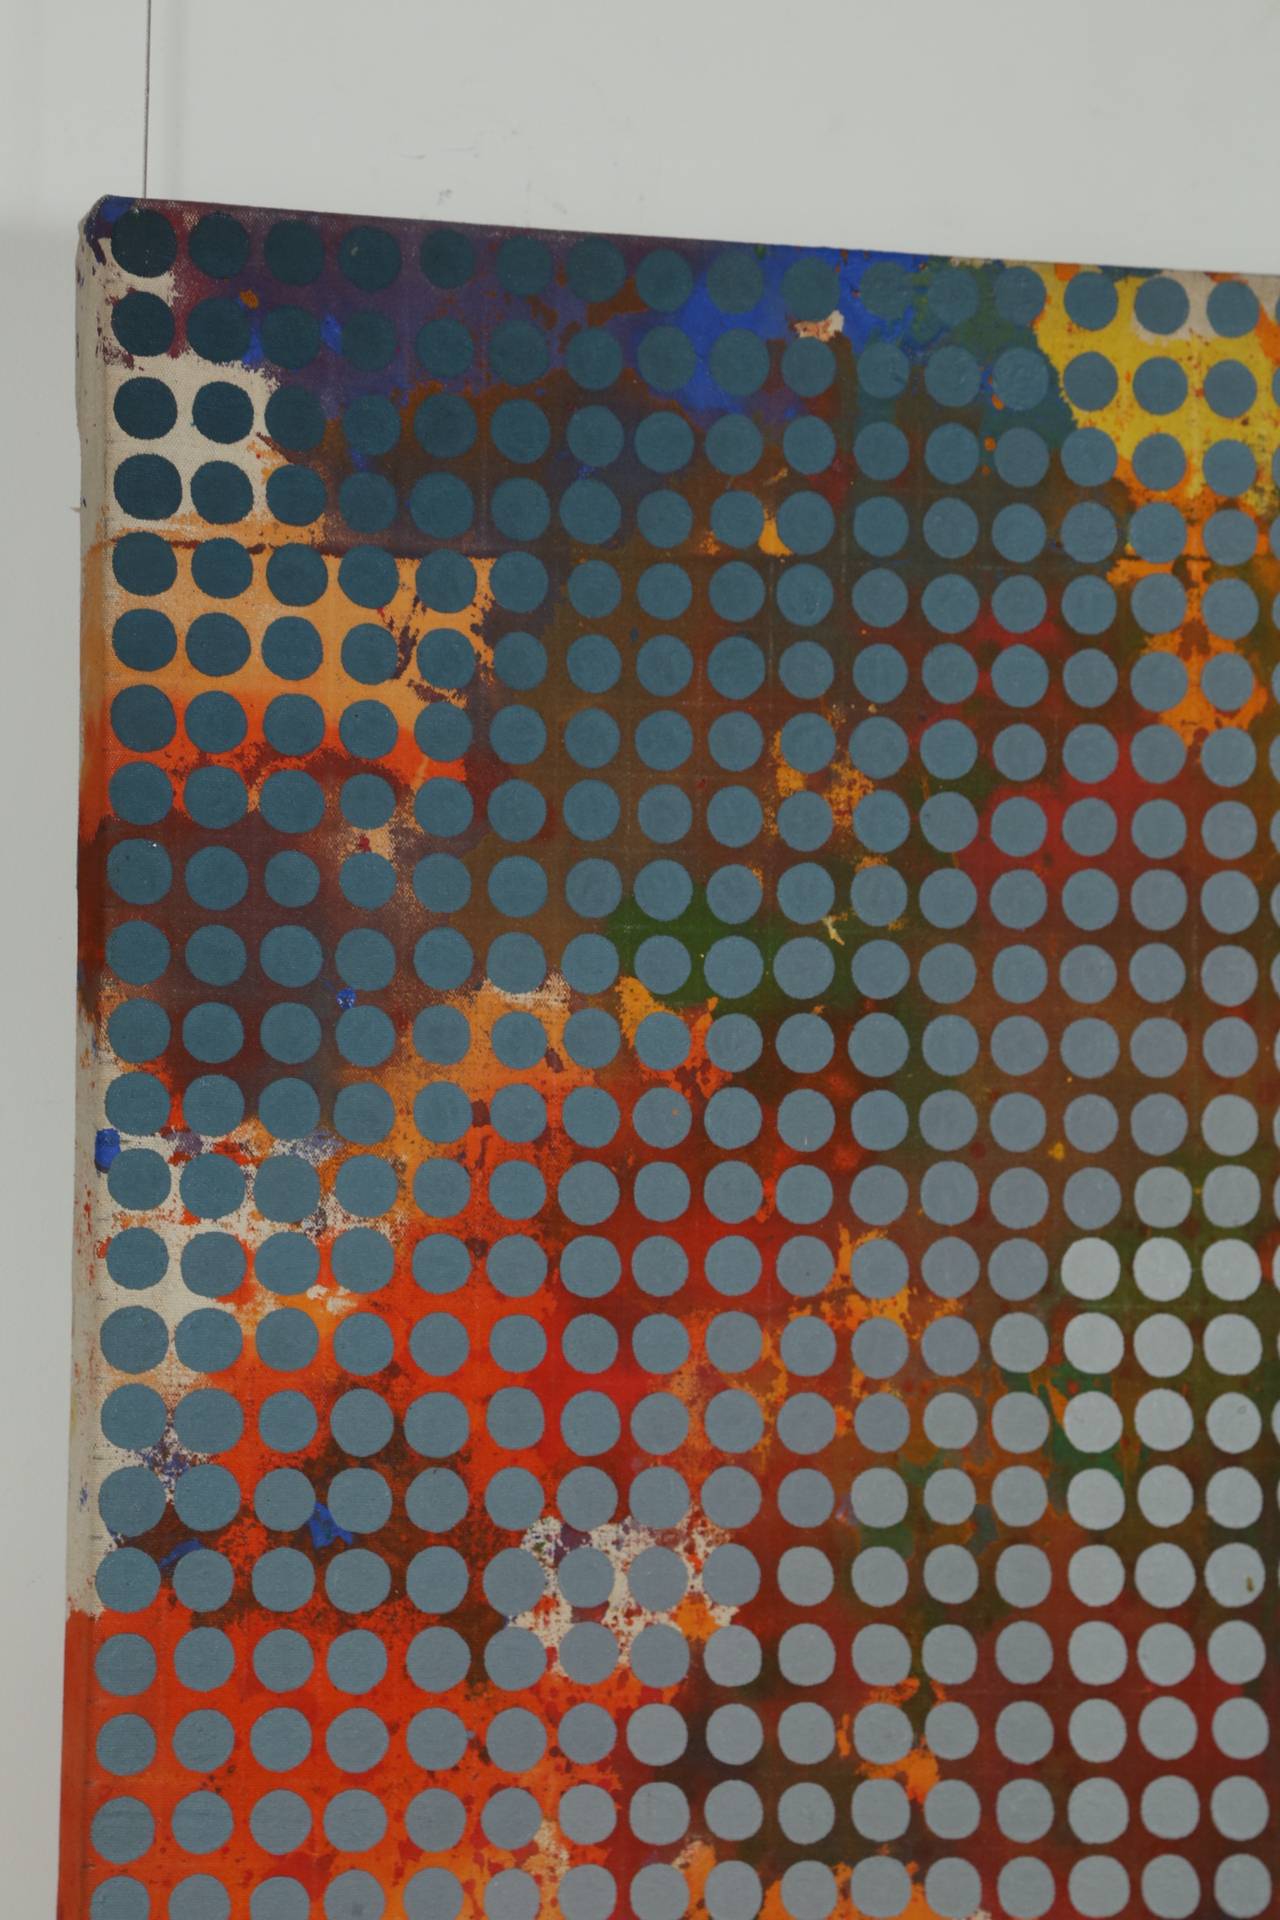 A colorful abstract painting overlaid with penny-sized dots in a color gradient from cadet blue to gray. The acrylic on canvas is signed on the back C. Swallow and dated 1971. We have two pieces by this artist, which are shown together in Image 9.